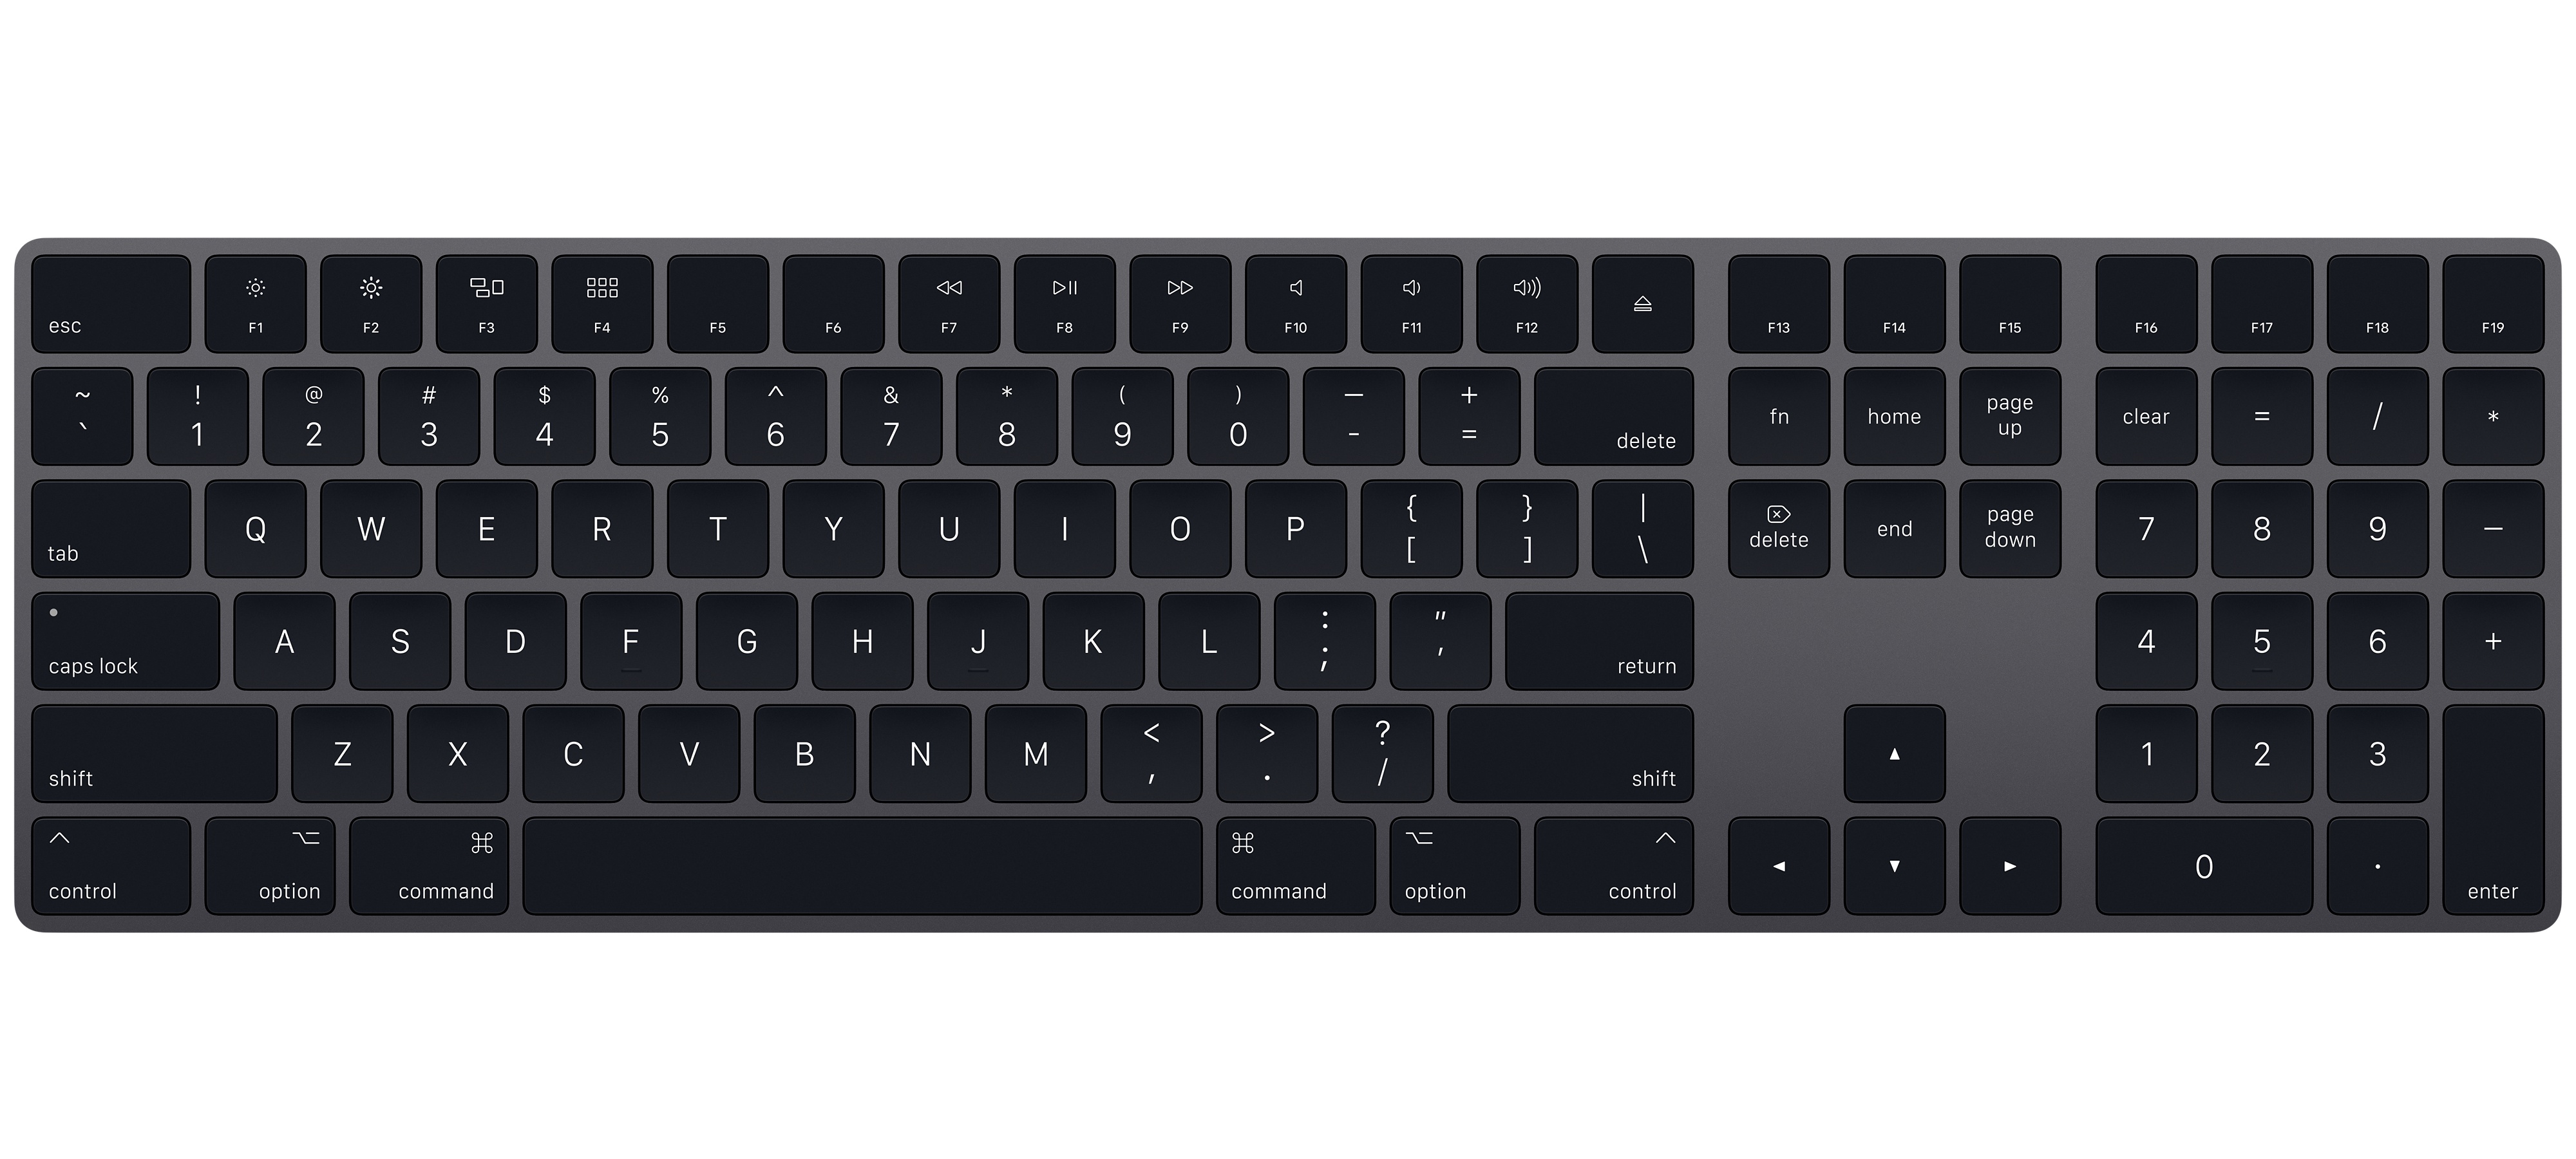 Buy Magic Keyboard with Numeric Keypad for Mac in Space Gray - Apple